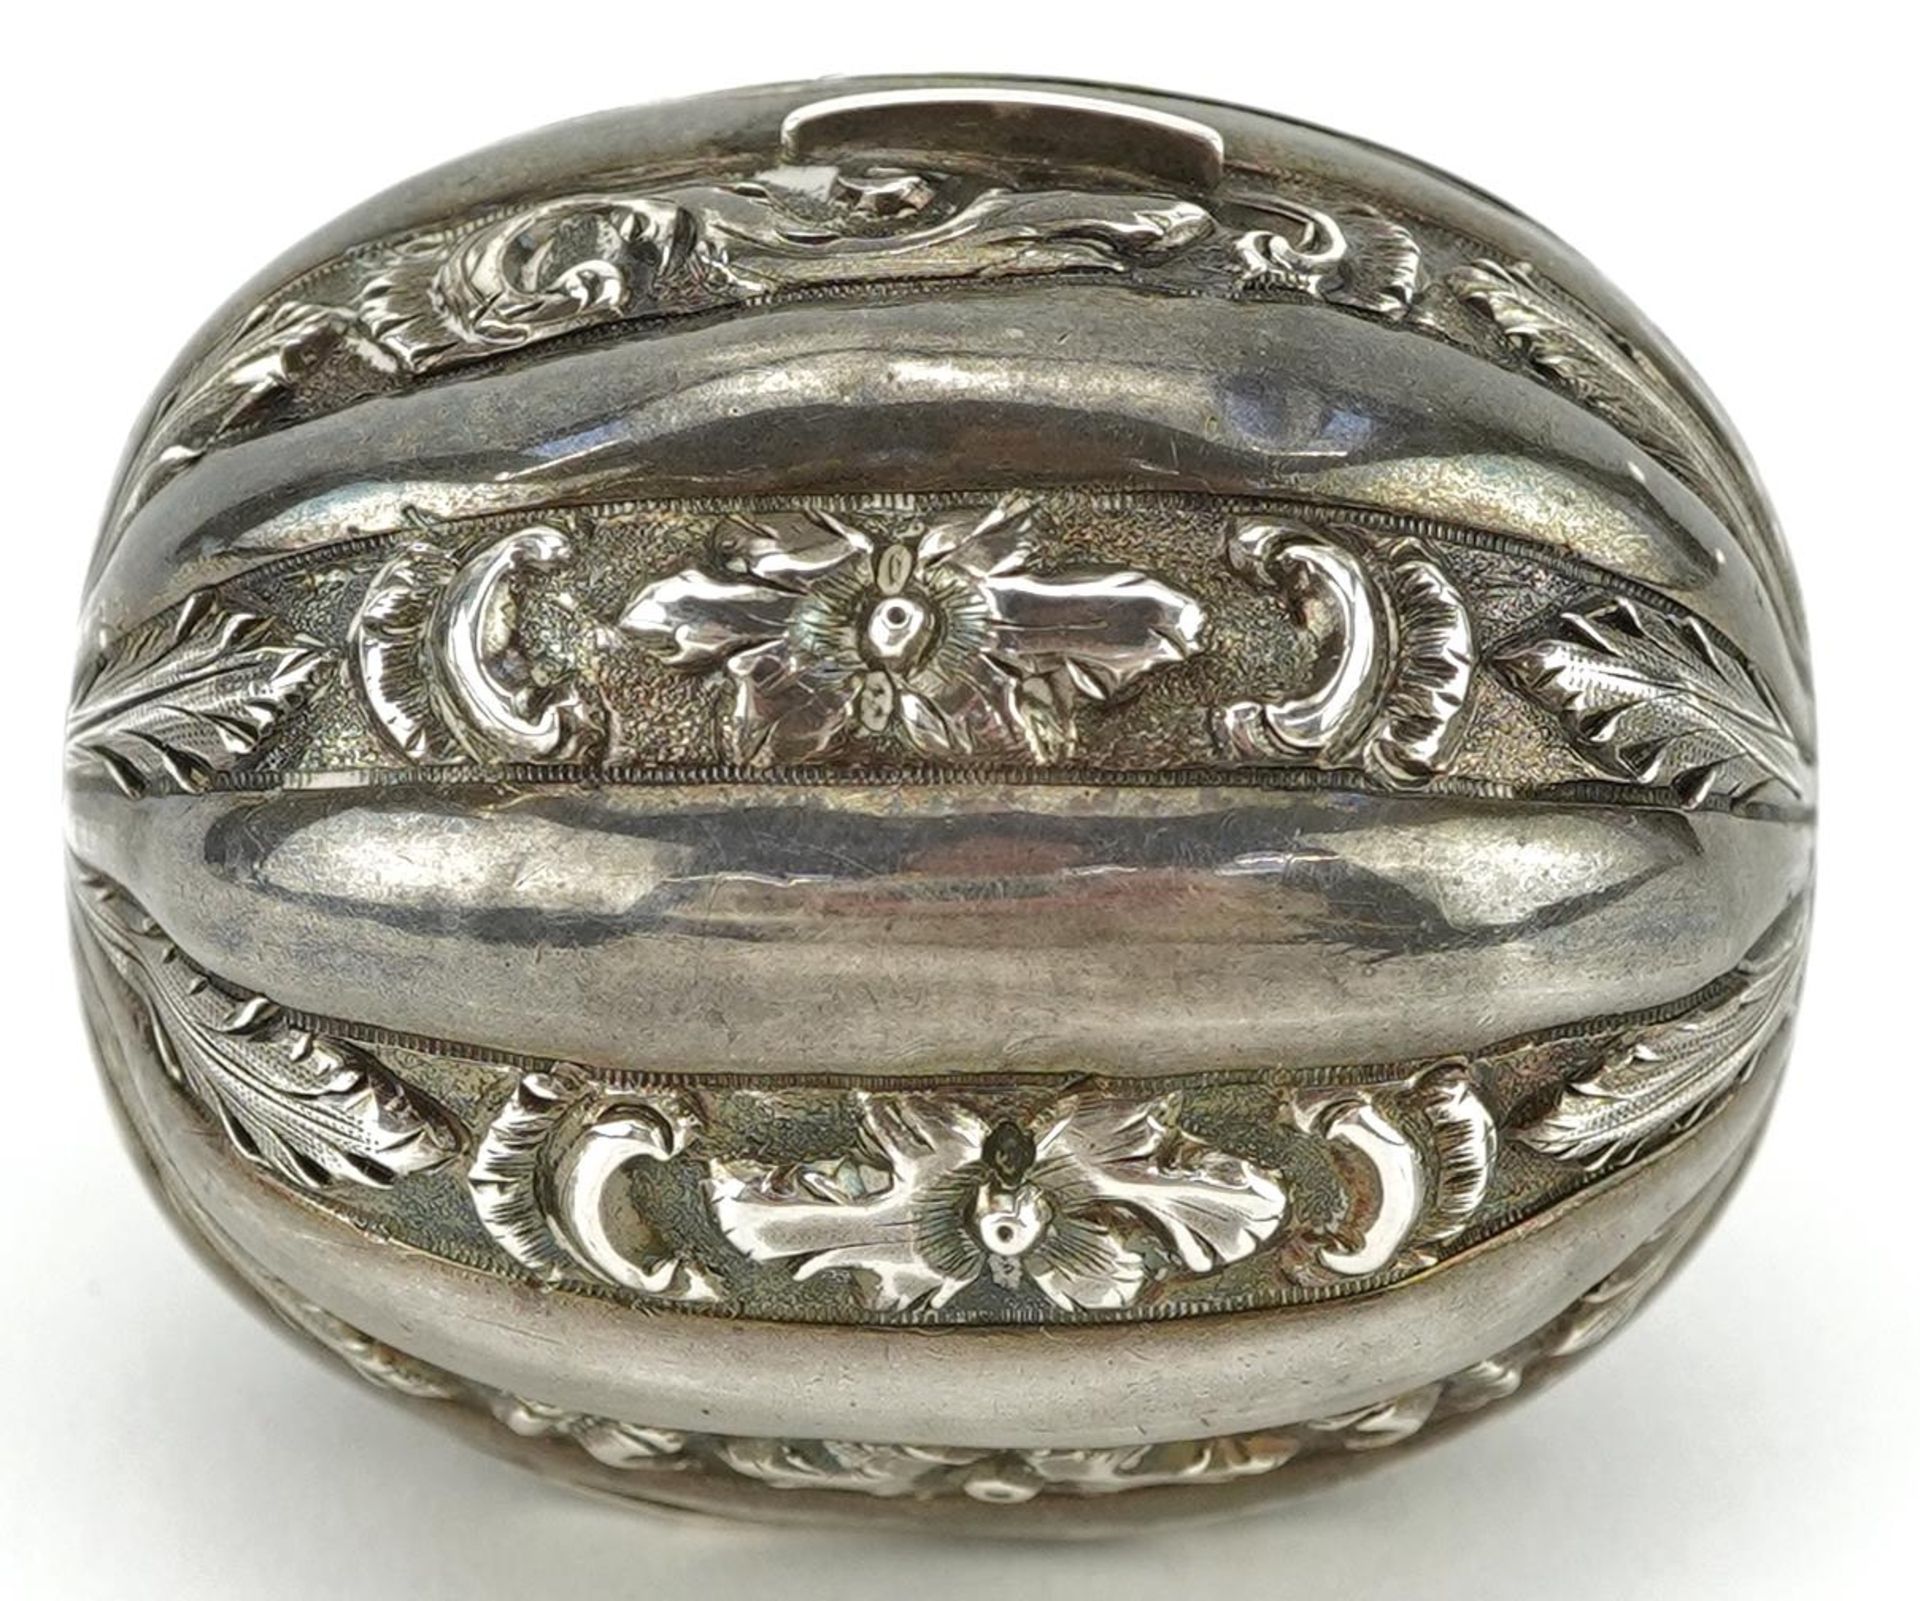 Hilliard & Thomason, Victorian silver nutmeg grater in the form of a nutmeg, Birmingham 1851, 4cm in - Image 7 of 7